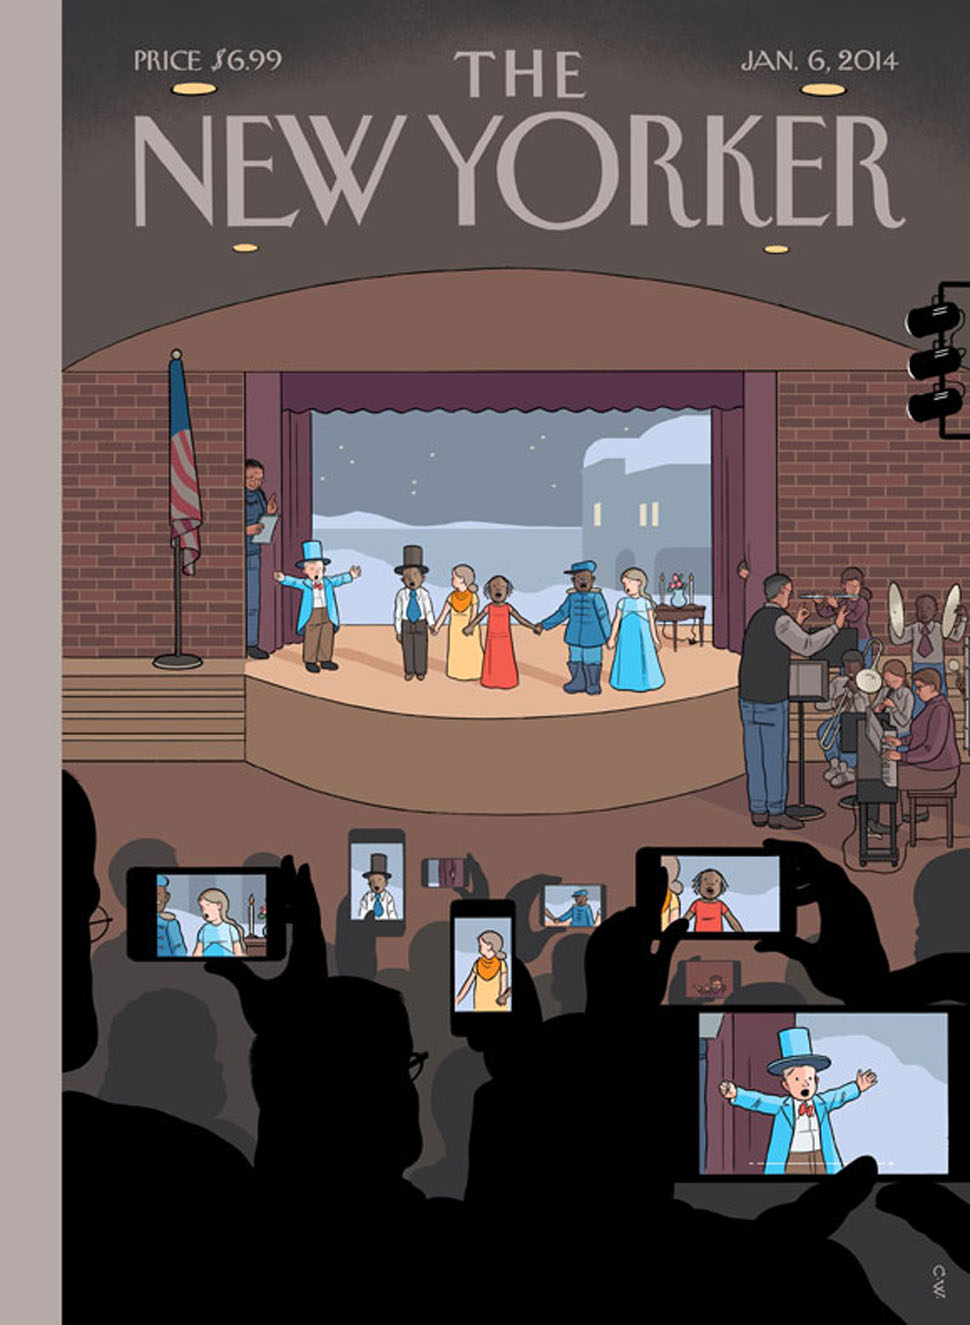 All Together Now: Chris Ware Nails It With This New Yorker Cover